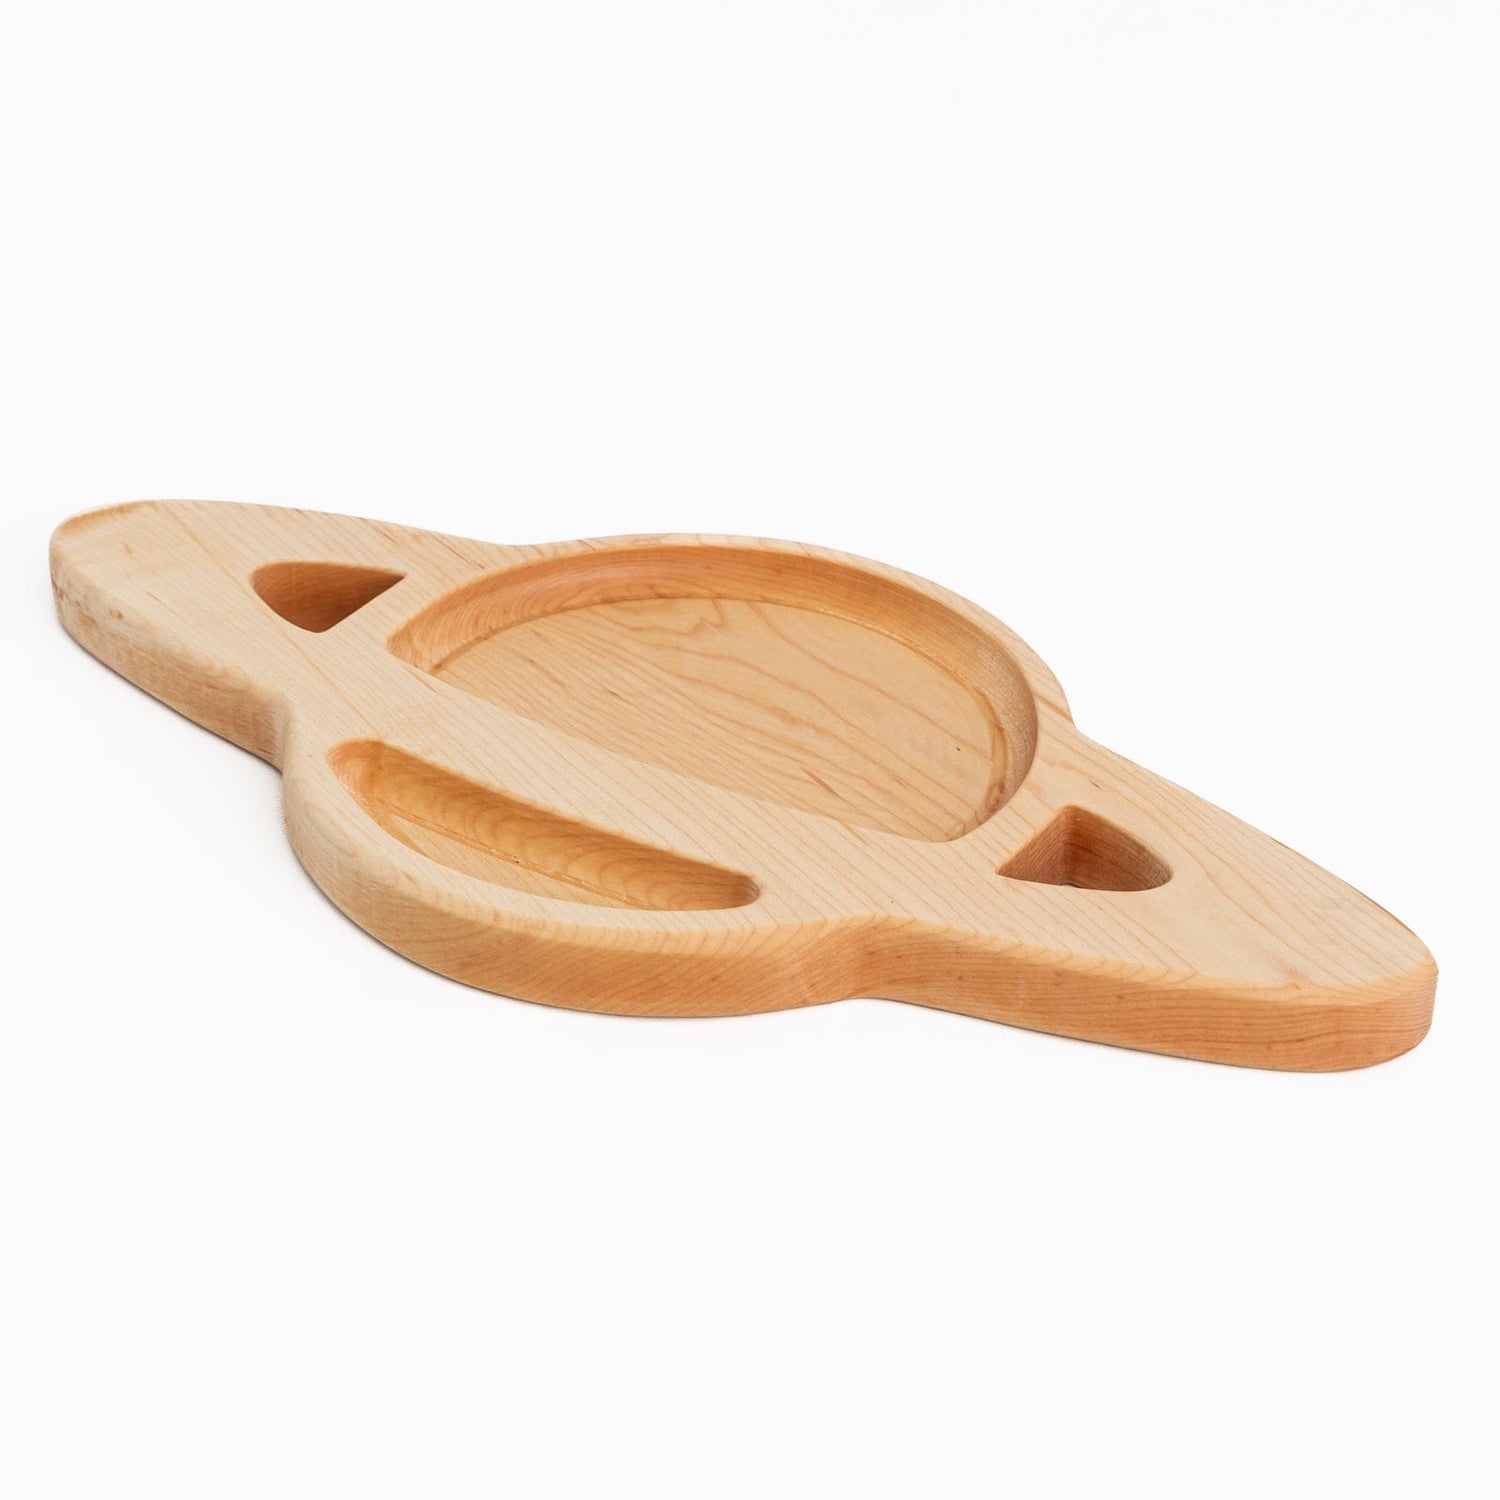 Aw & Co. Sensory Play Wooden Saturn Plate / Sensory Tray (Made in Canada)